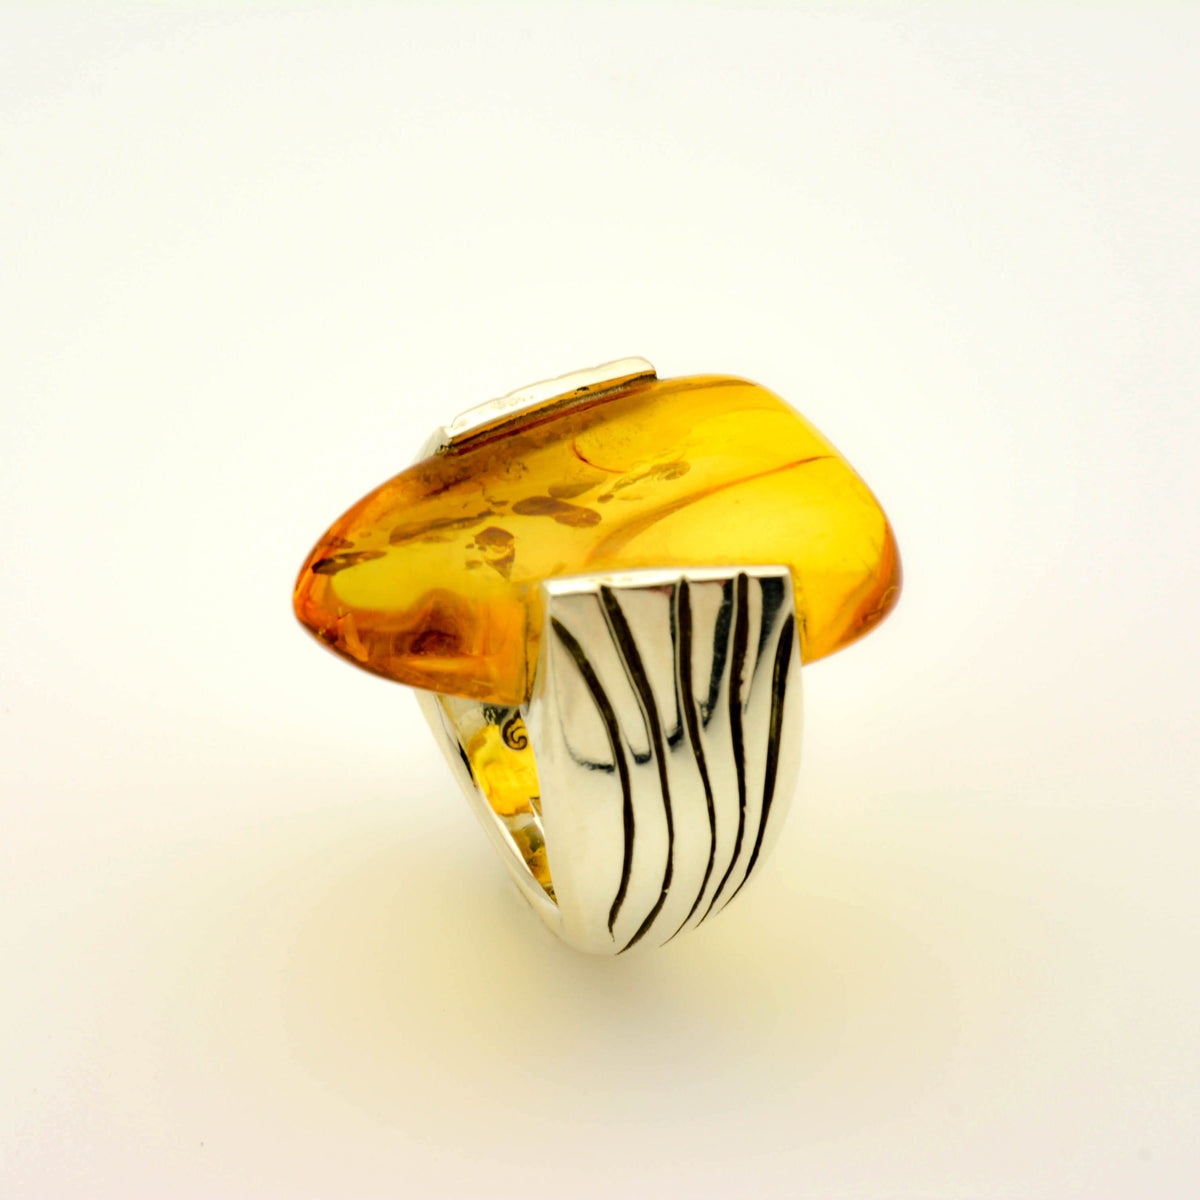 Unique Baltic Amber Sterling Silver Ring, Custom-Made for You